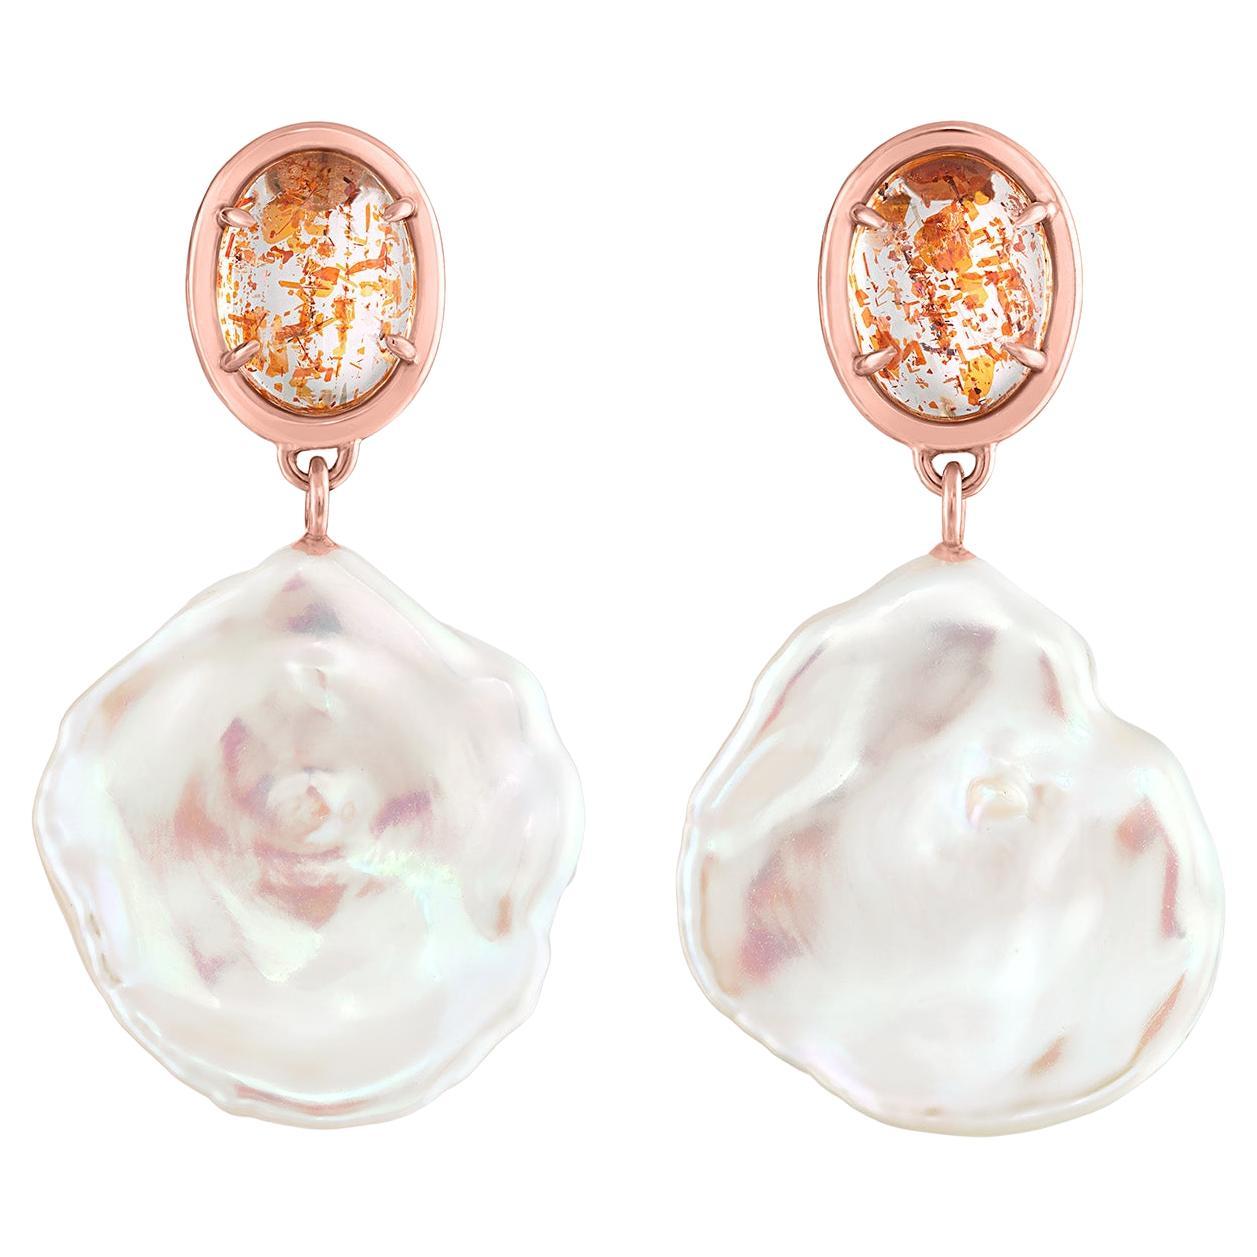 Sunstone & Baroque Coin Pearl Drop Earrings Set in Rose Gold